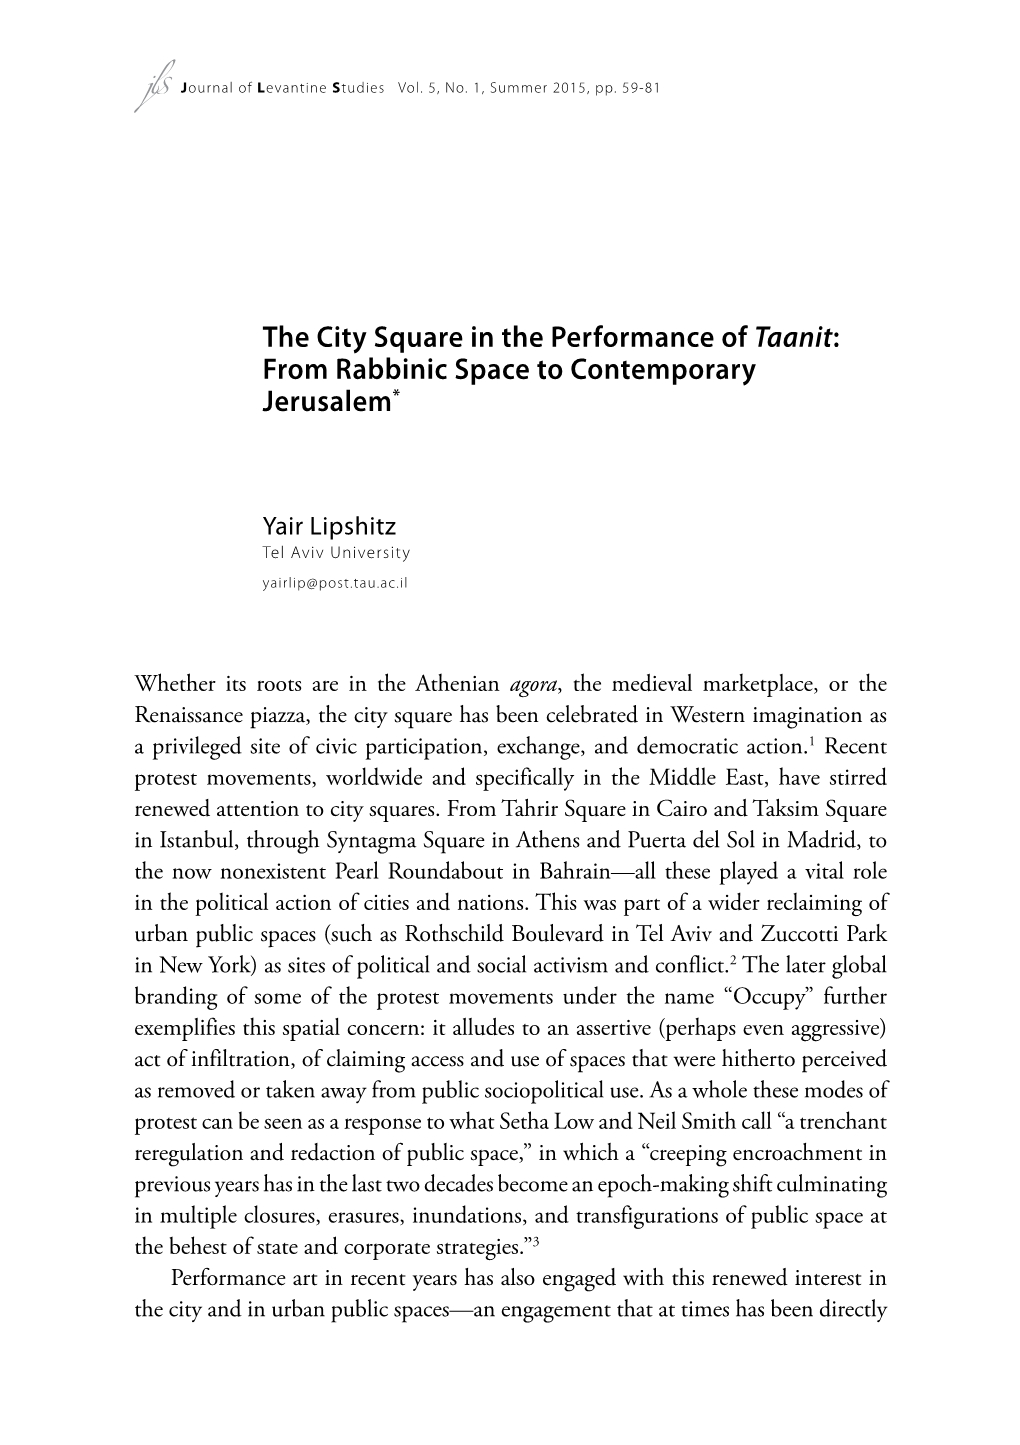 The City Square in the Performance of Taanit: from Rabbinic Space to Contemporary Jerusalem*